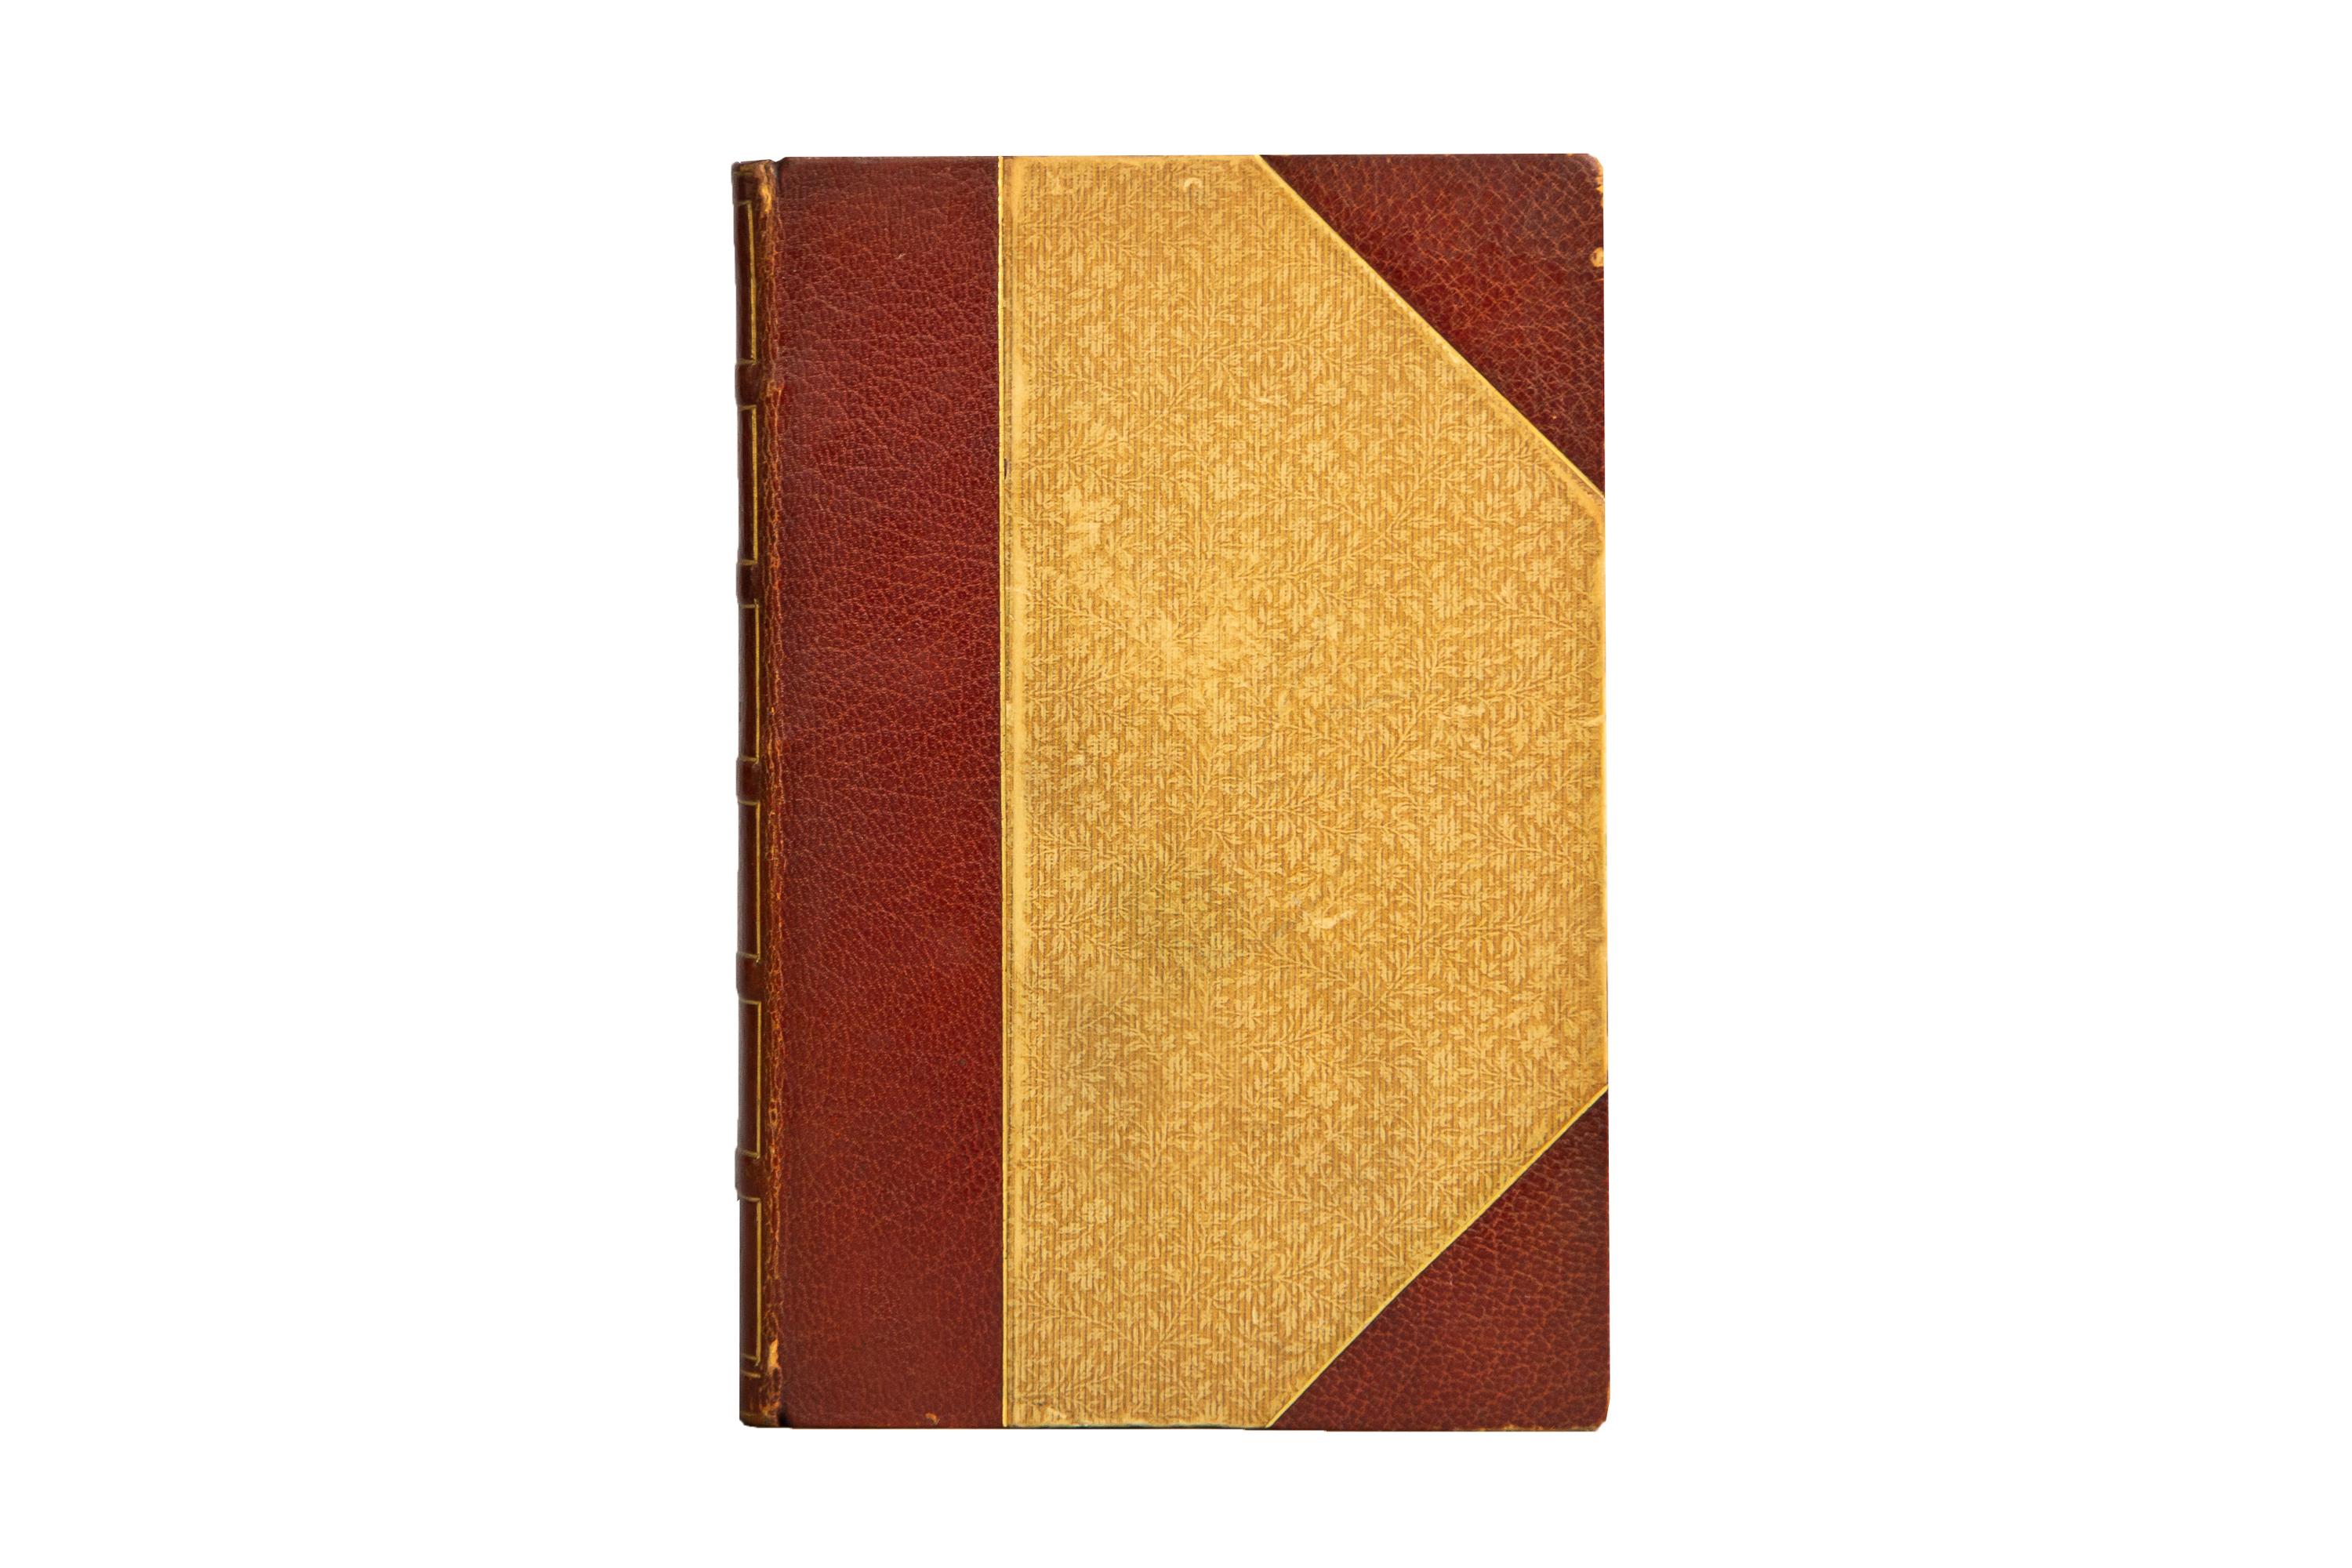 3 Volumes. John Ruskin, The Stones of Venice. Bound in 3/4 brown morocco and decorative floral boards. Raised band spine with gilt-bordered panels and label lettering. The top edge is gilt with decorative floral endpapers. Illustrations were drawn